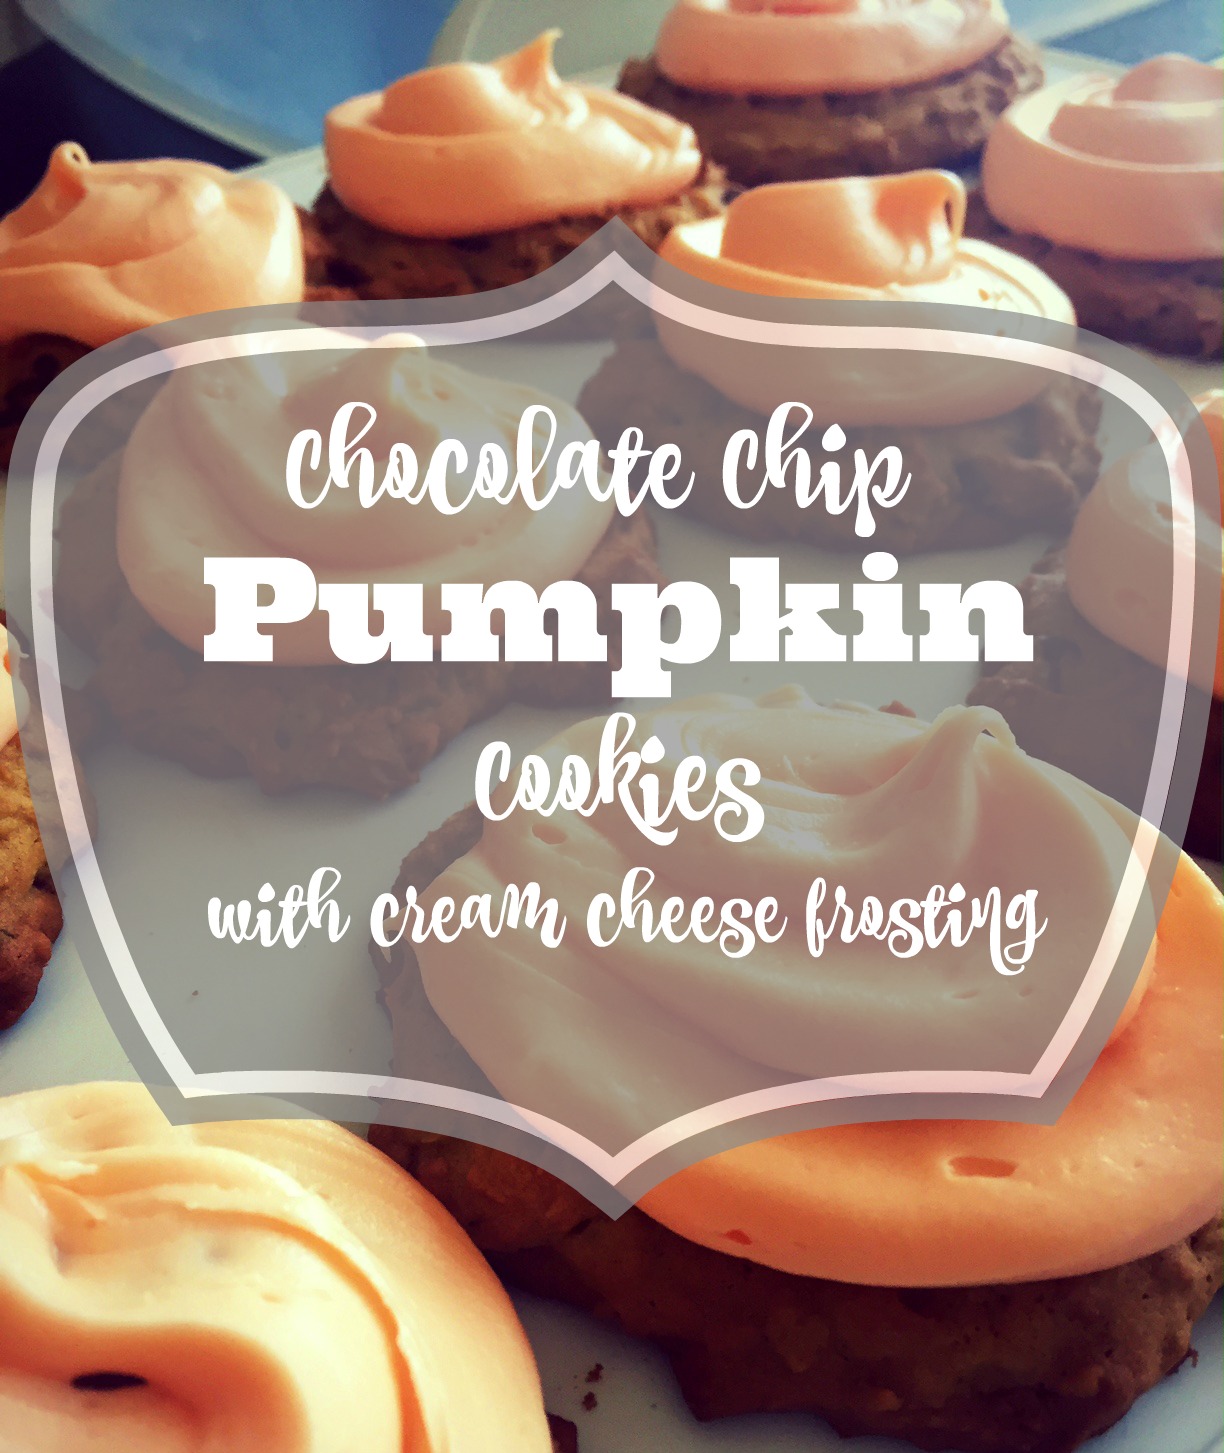 These chocolate chip pumpkin cookies with cream cheese frosting are absolutely AMAZING!